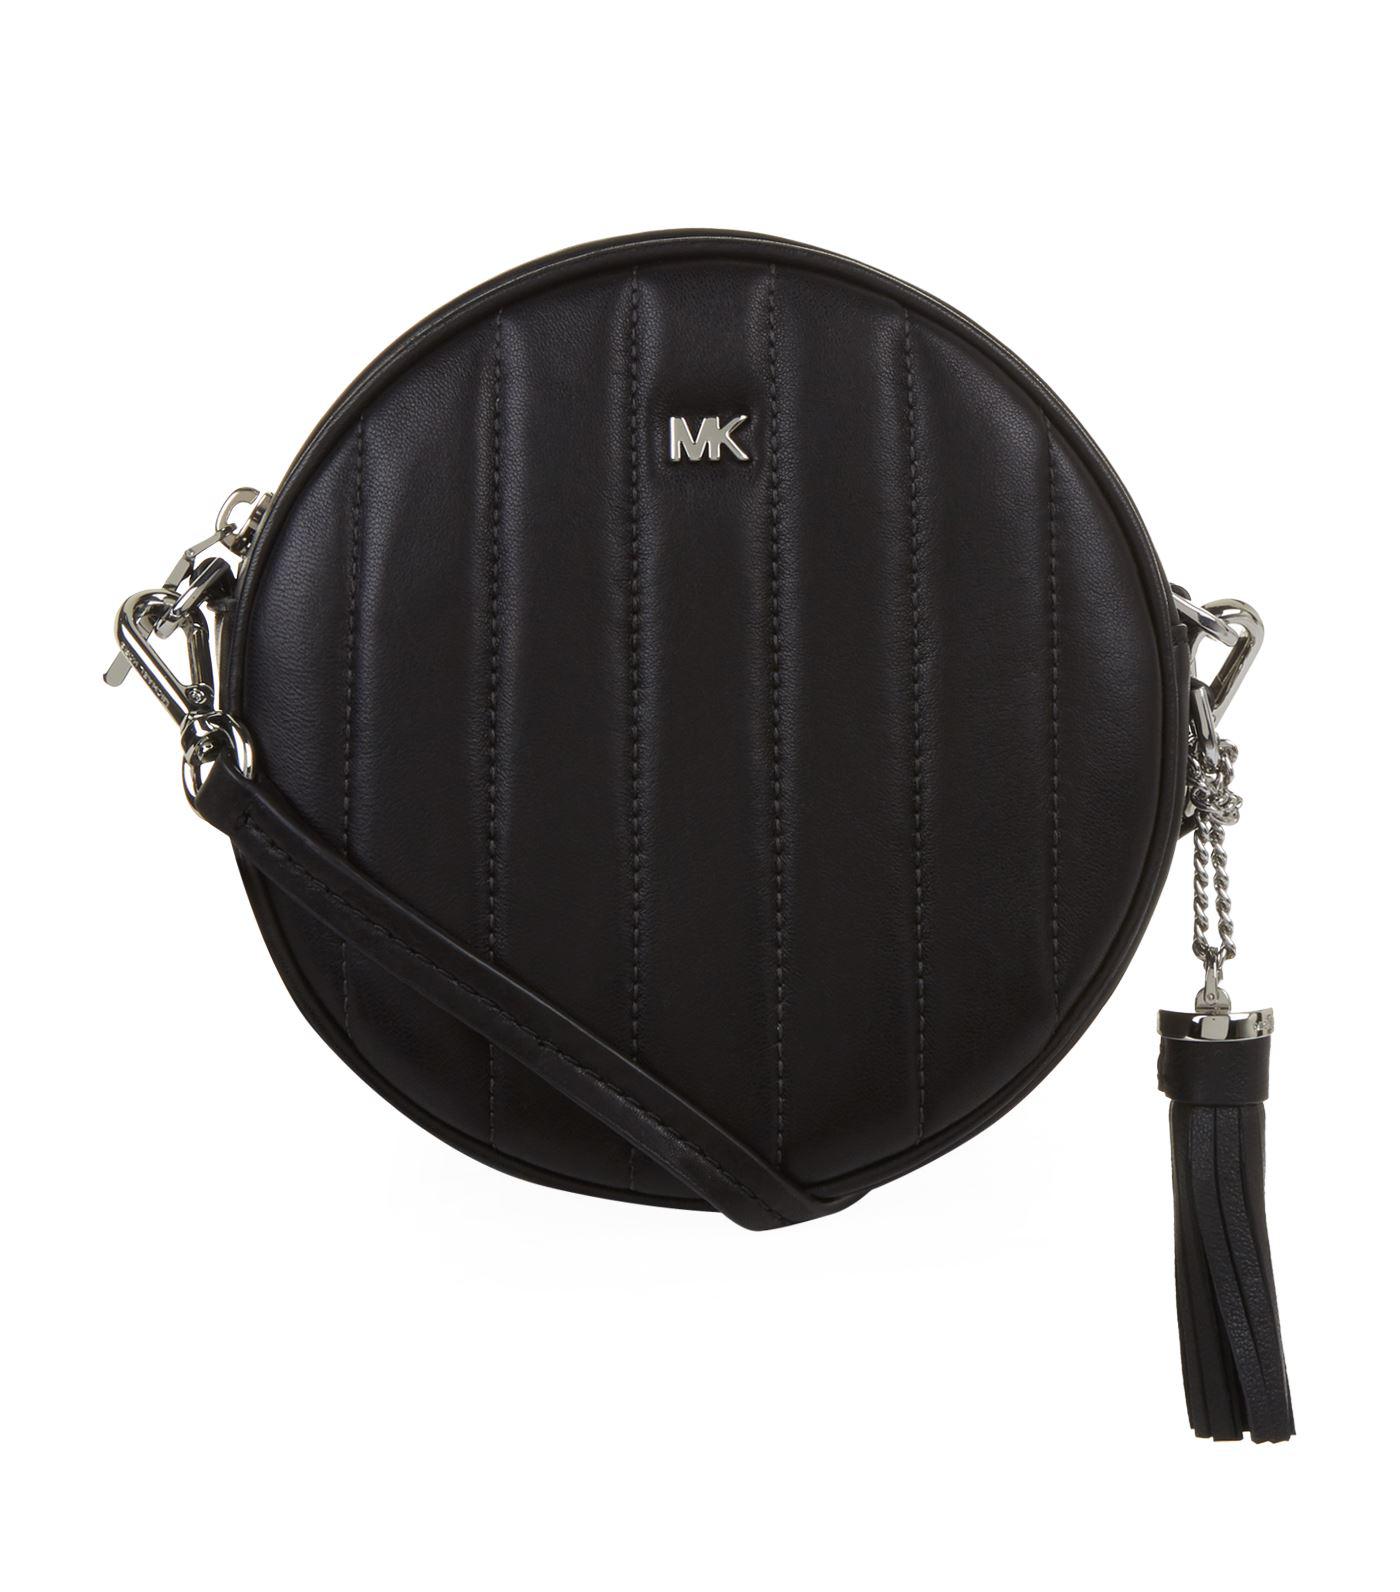 Michael Quilted Round Cross Body Bag in Black - Lyst